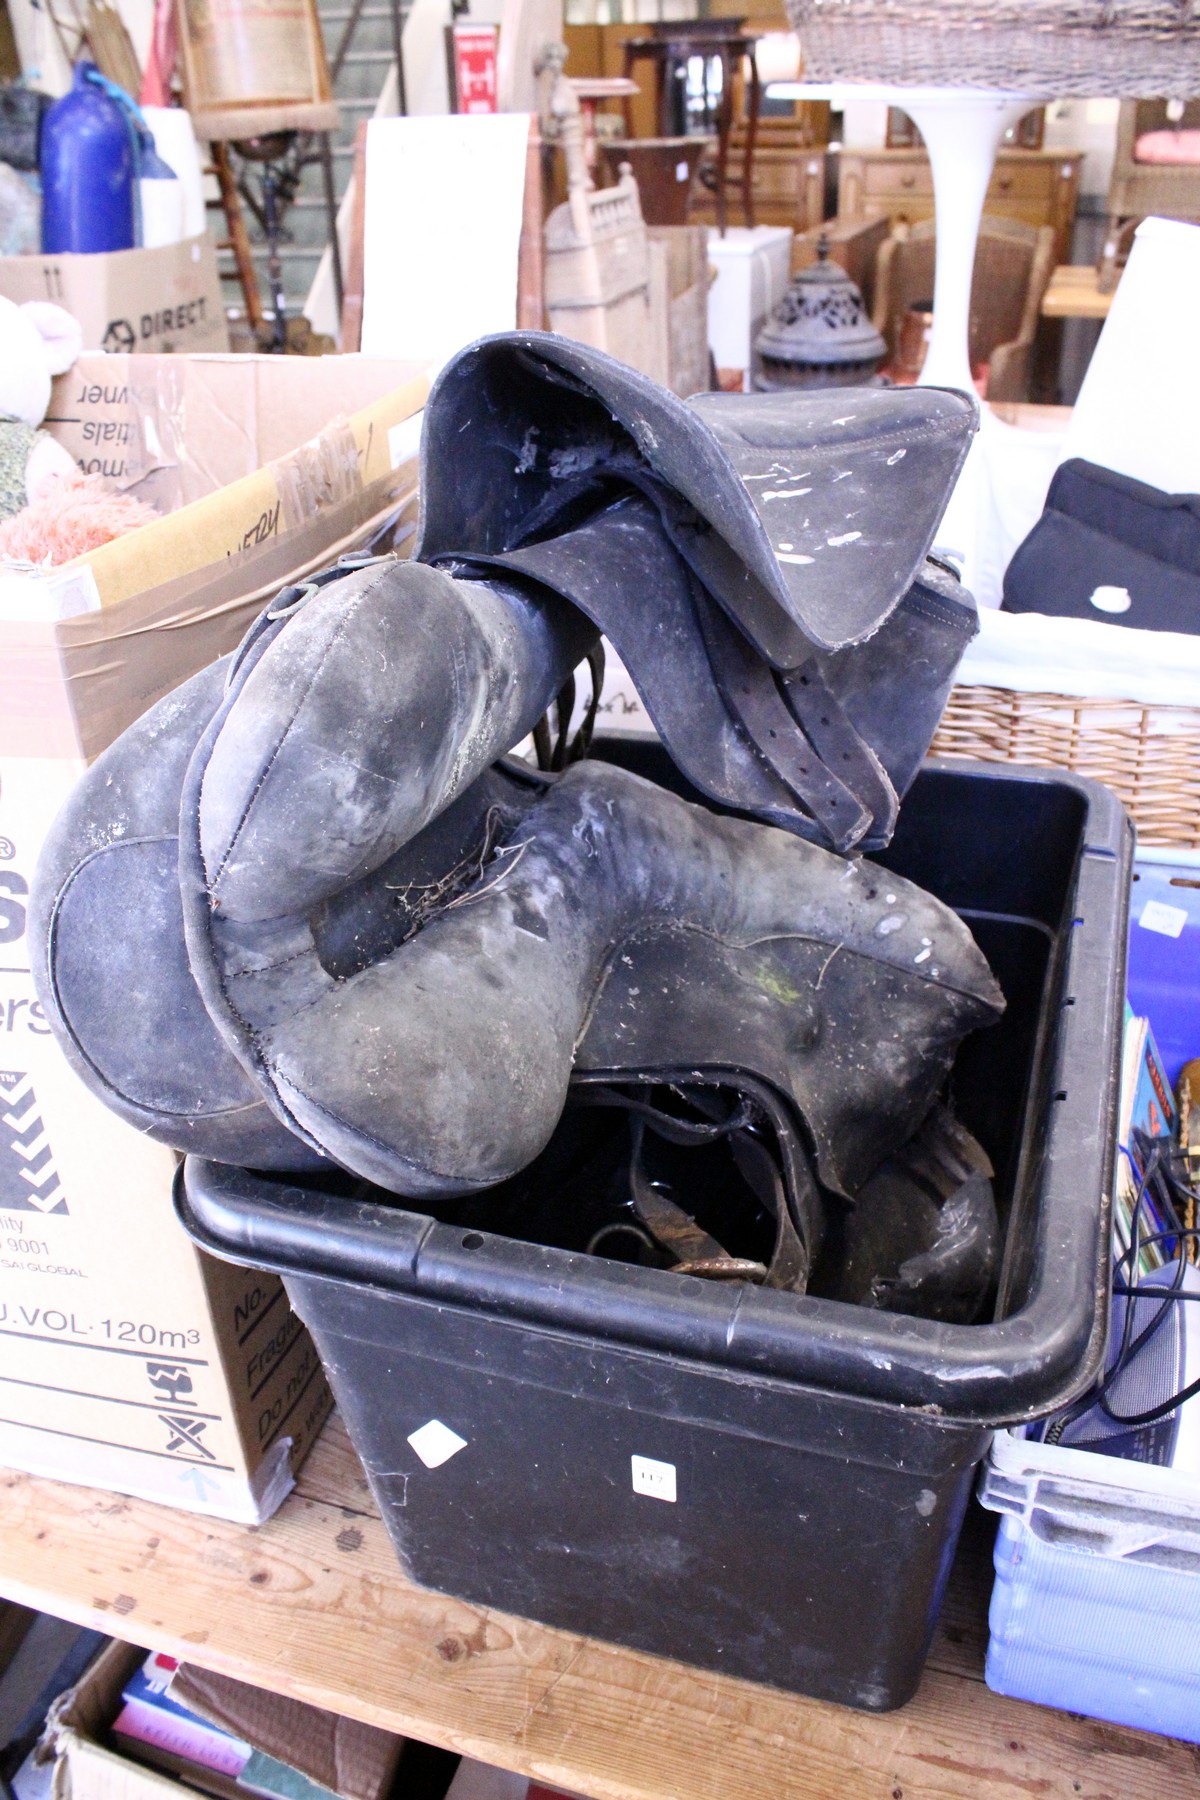 A leather horse saddle and similar equipment